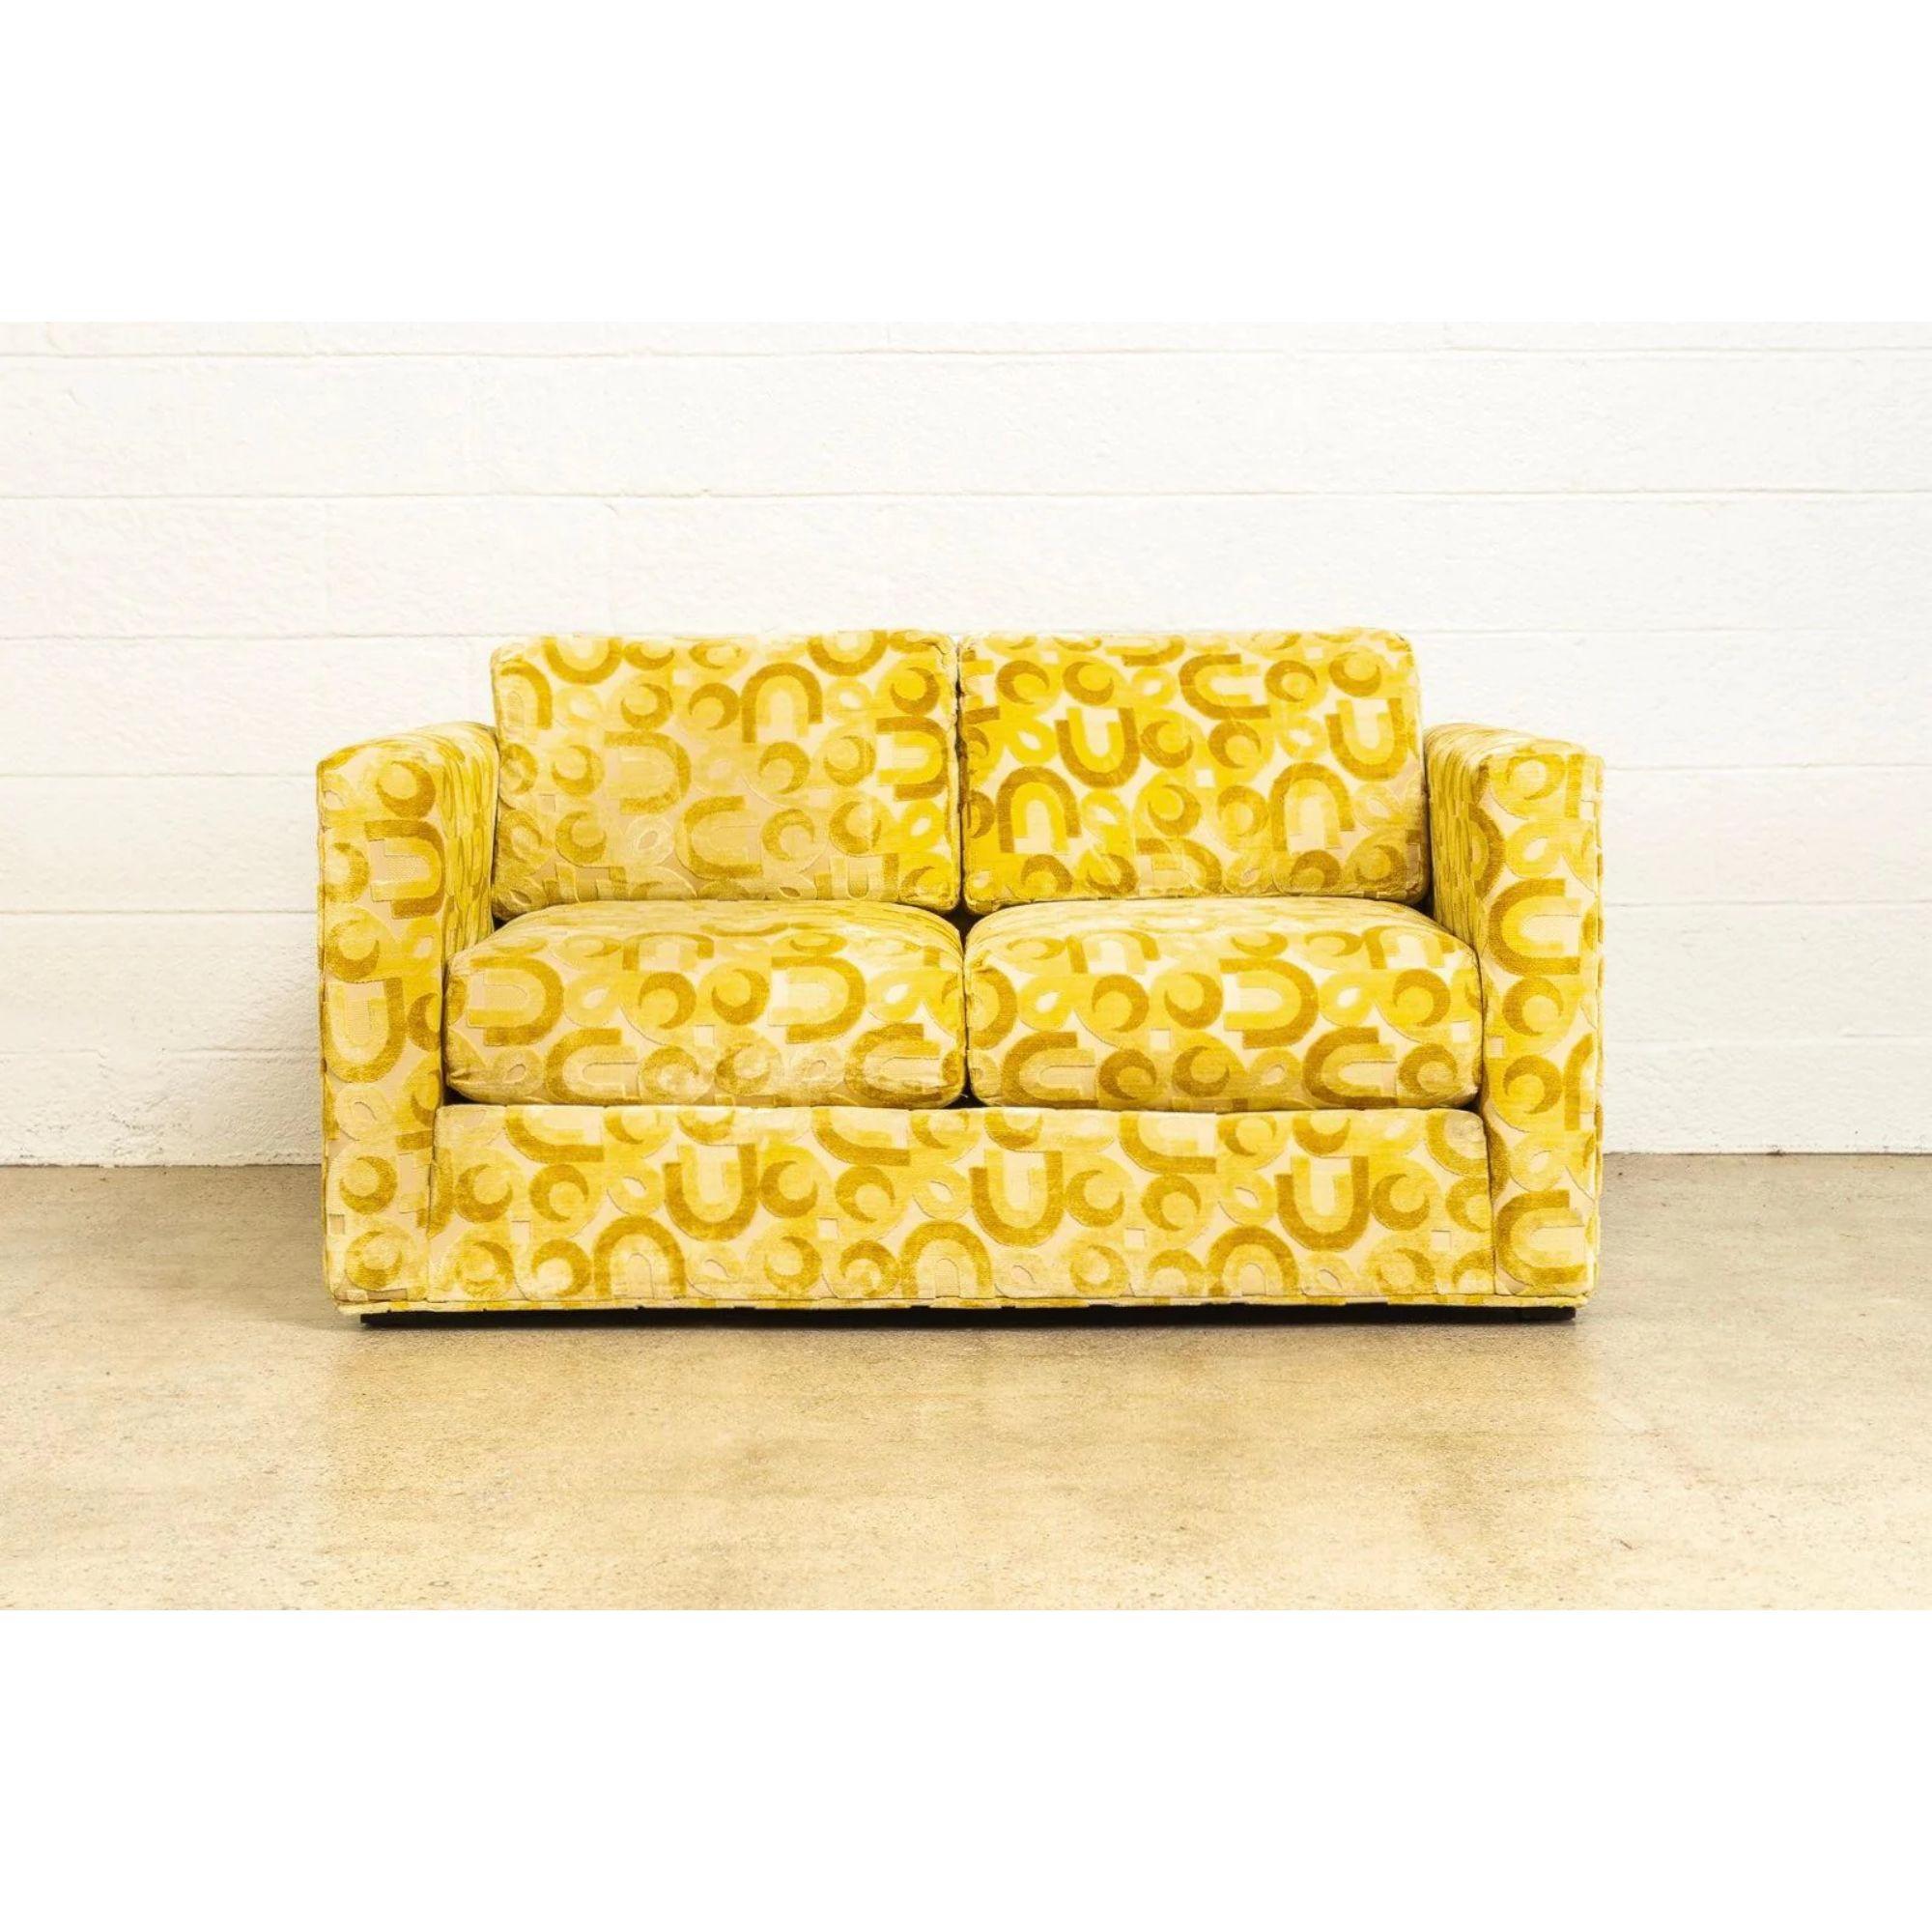 This vintage mid century modern loveseat made by Sawyers Furniture Company is circa 1970. With fabulous mid century styling, this two-seat loveseat has a clean, boxy shape and is upholstered in an incredible mod fabric featuring U-shapes and circles